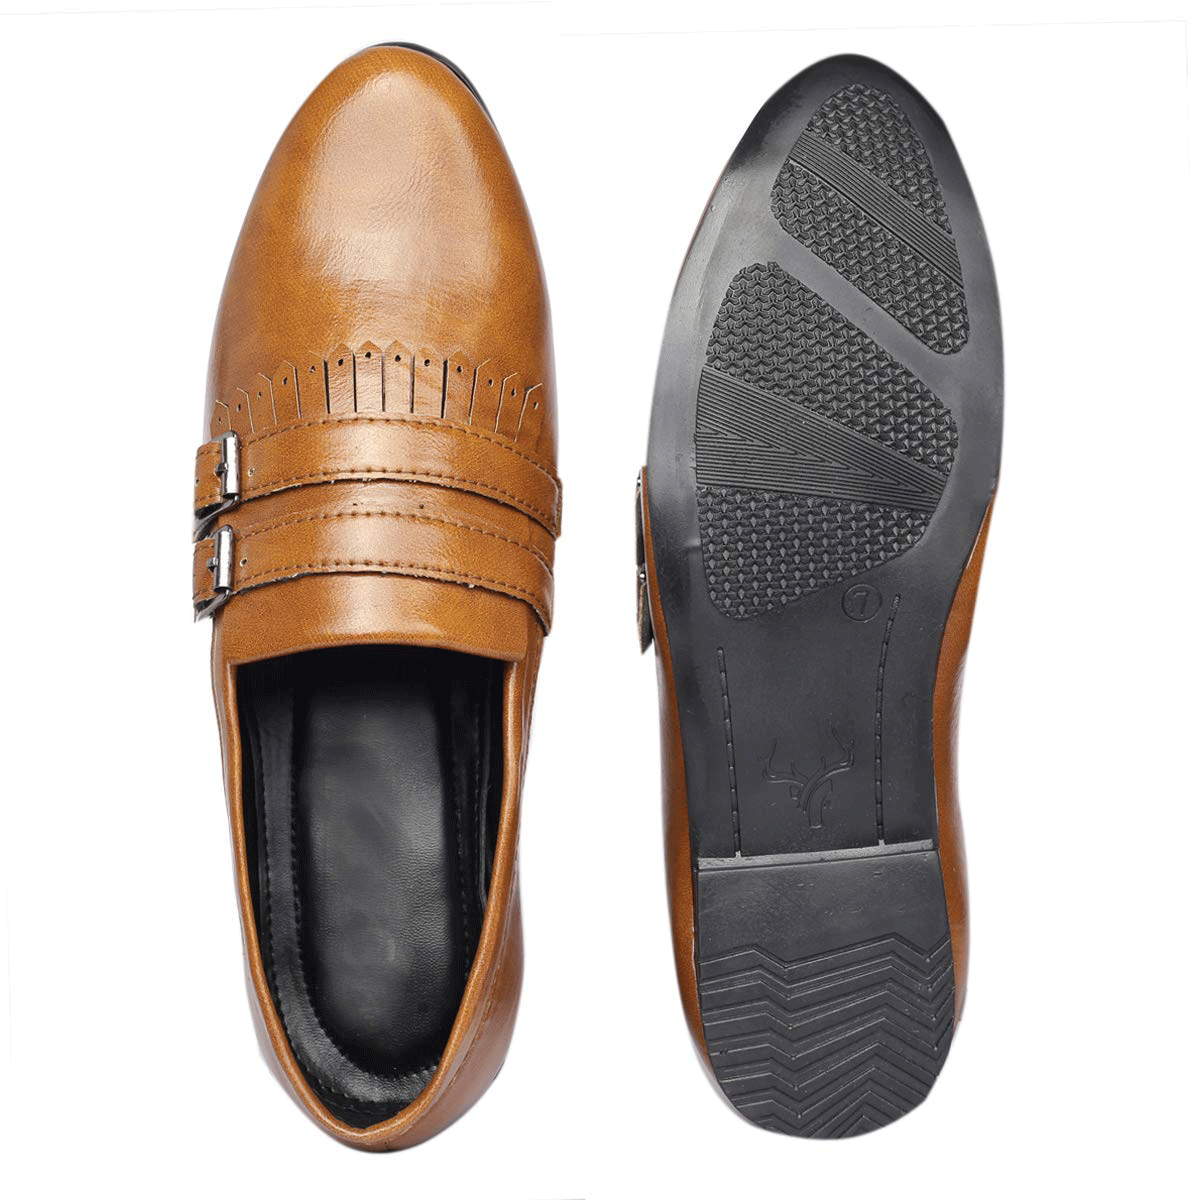 Double Monk Suede Material Pu Leather Casual & Part Wear Shoes For Men's-Unique and Classy